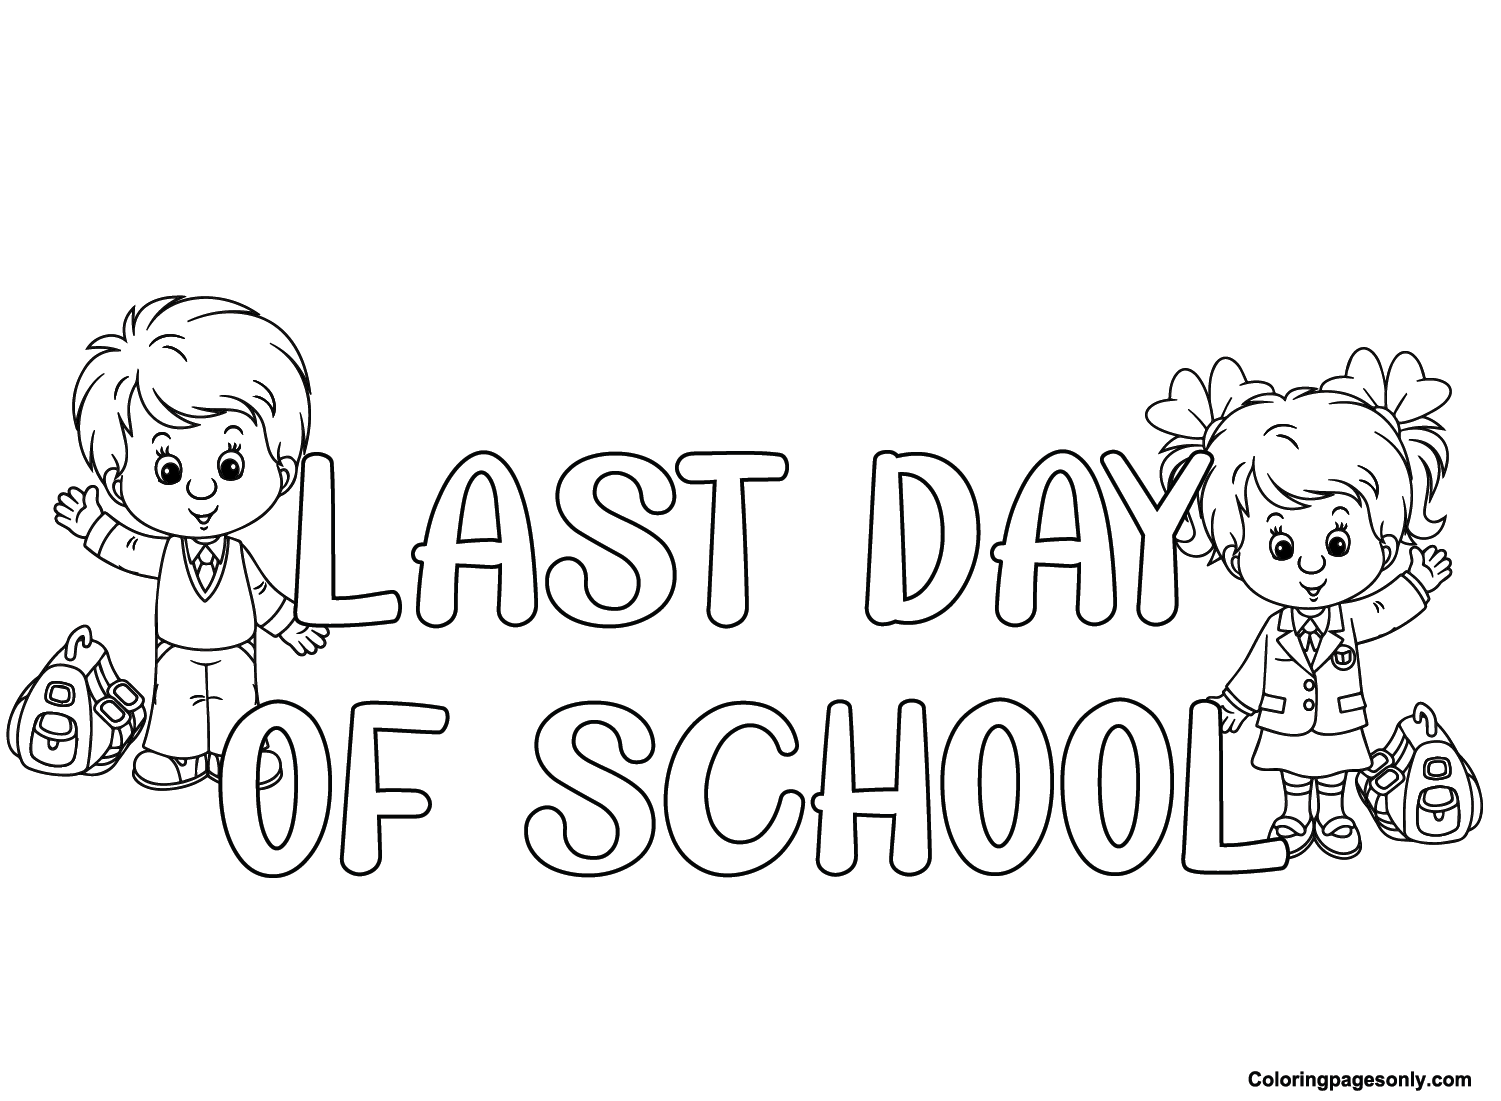 Last Day of School for Children Coloring Page